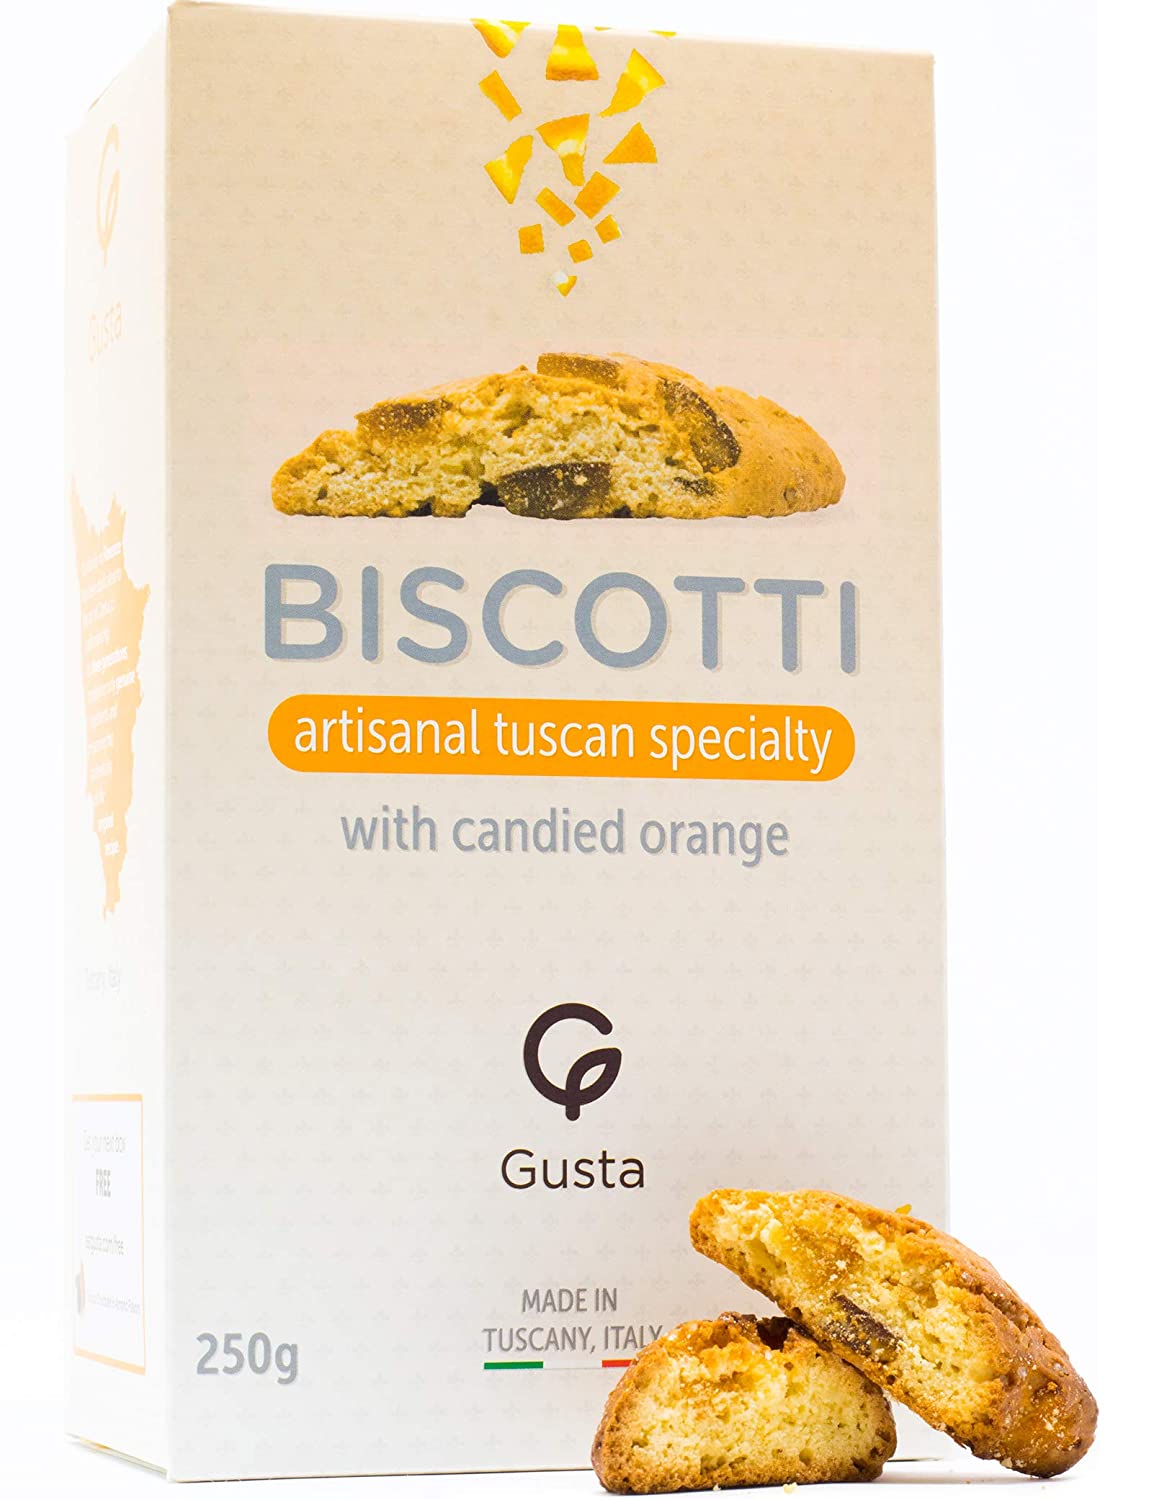 Gusta Authentic Biscotti Cookies Made in Tuscany, Italy - Variety-Pack (6 Boxes) 3.3 lbs